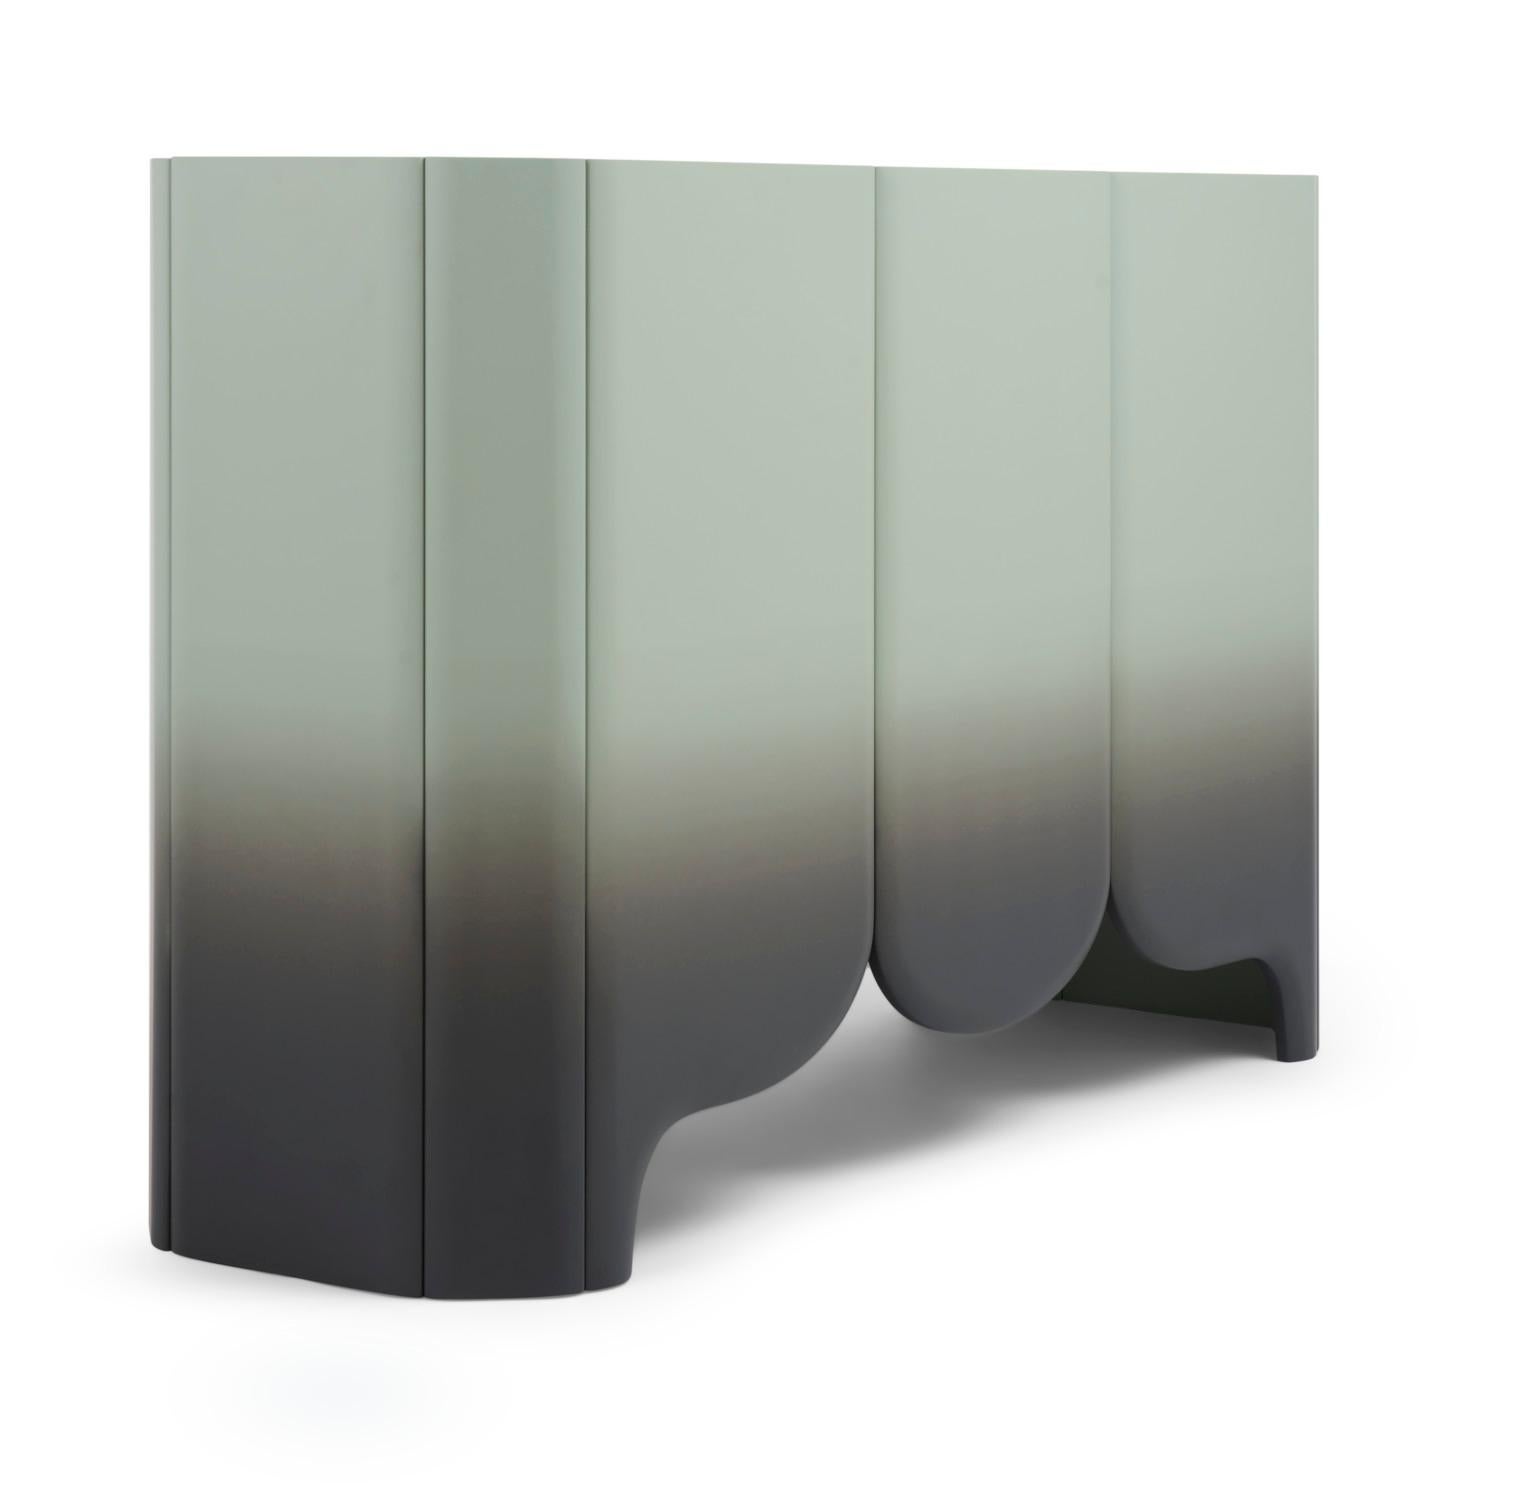 Sideboard design by Matteo Cibic, product by Scapin Collezioni.